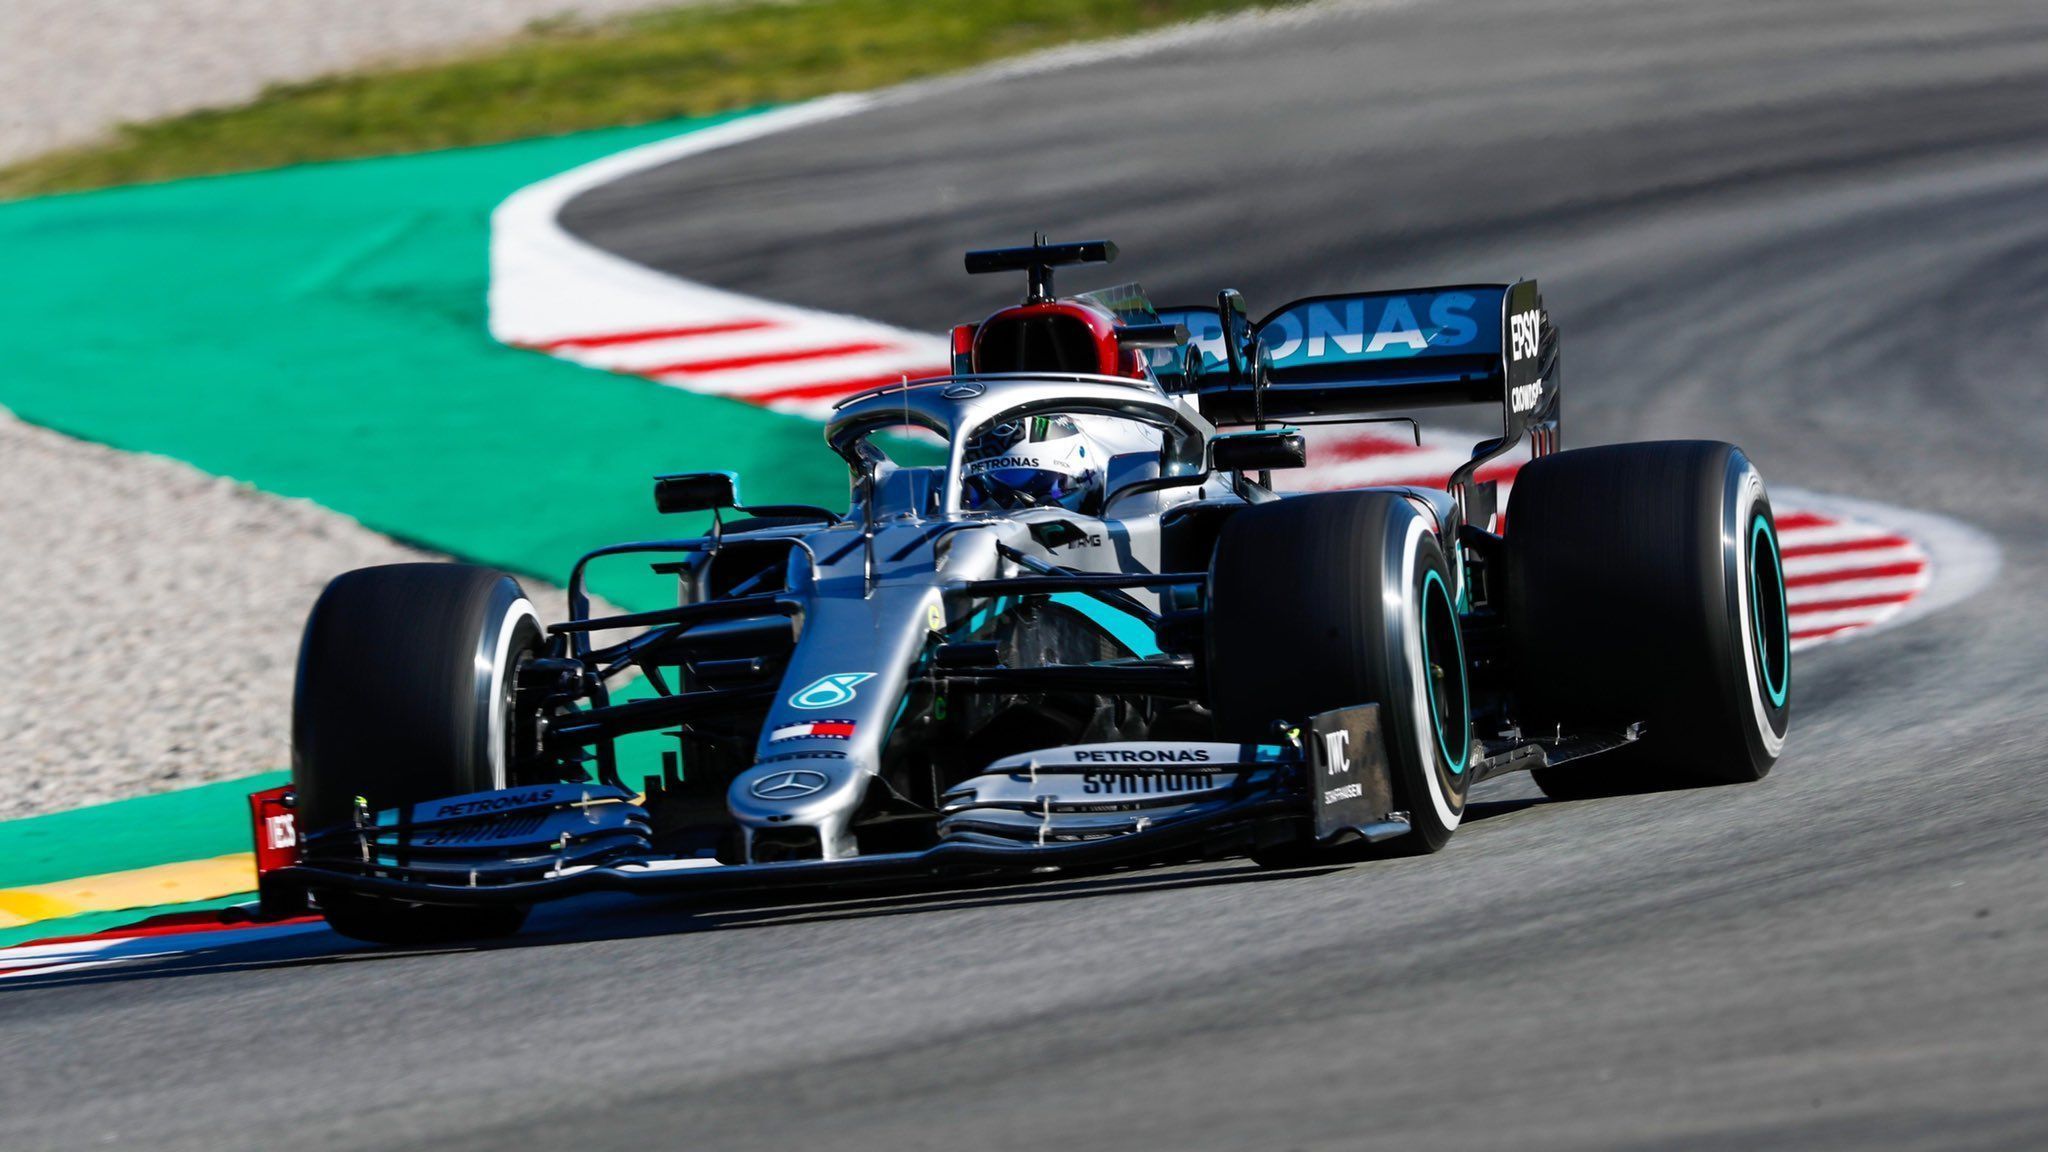 F1 2020, Barcelona Test 2: Bottas fastest as testing comes to an end